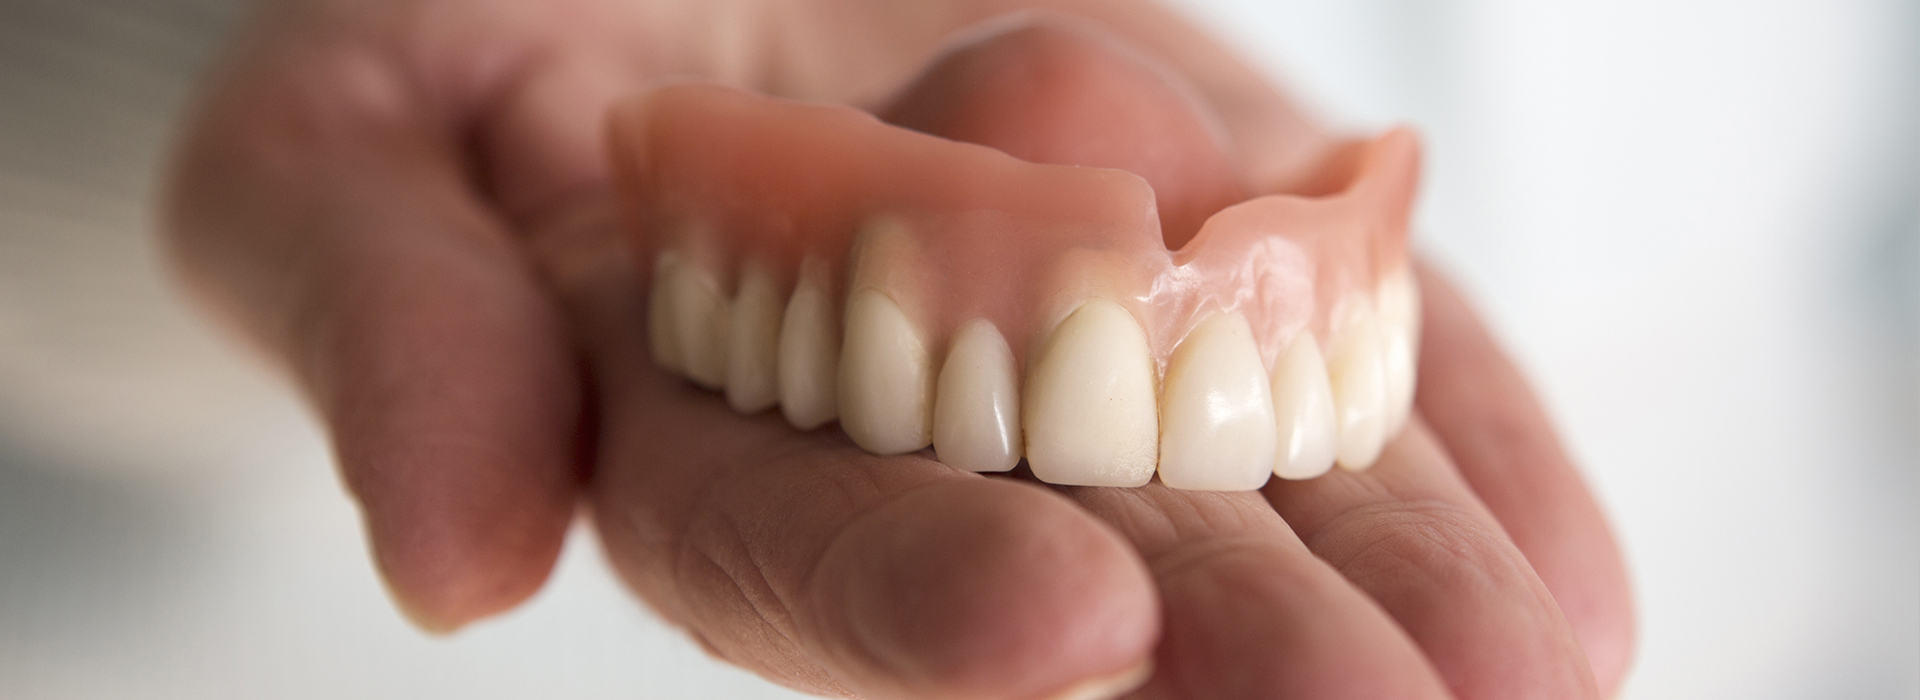 Corey J. Walther, DDS   Associates | Dentures, Extractions and Periodontal Treatment